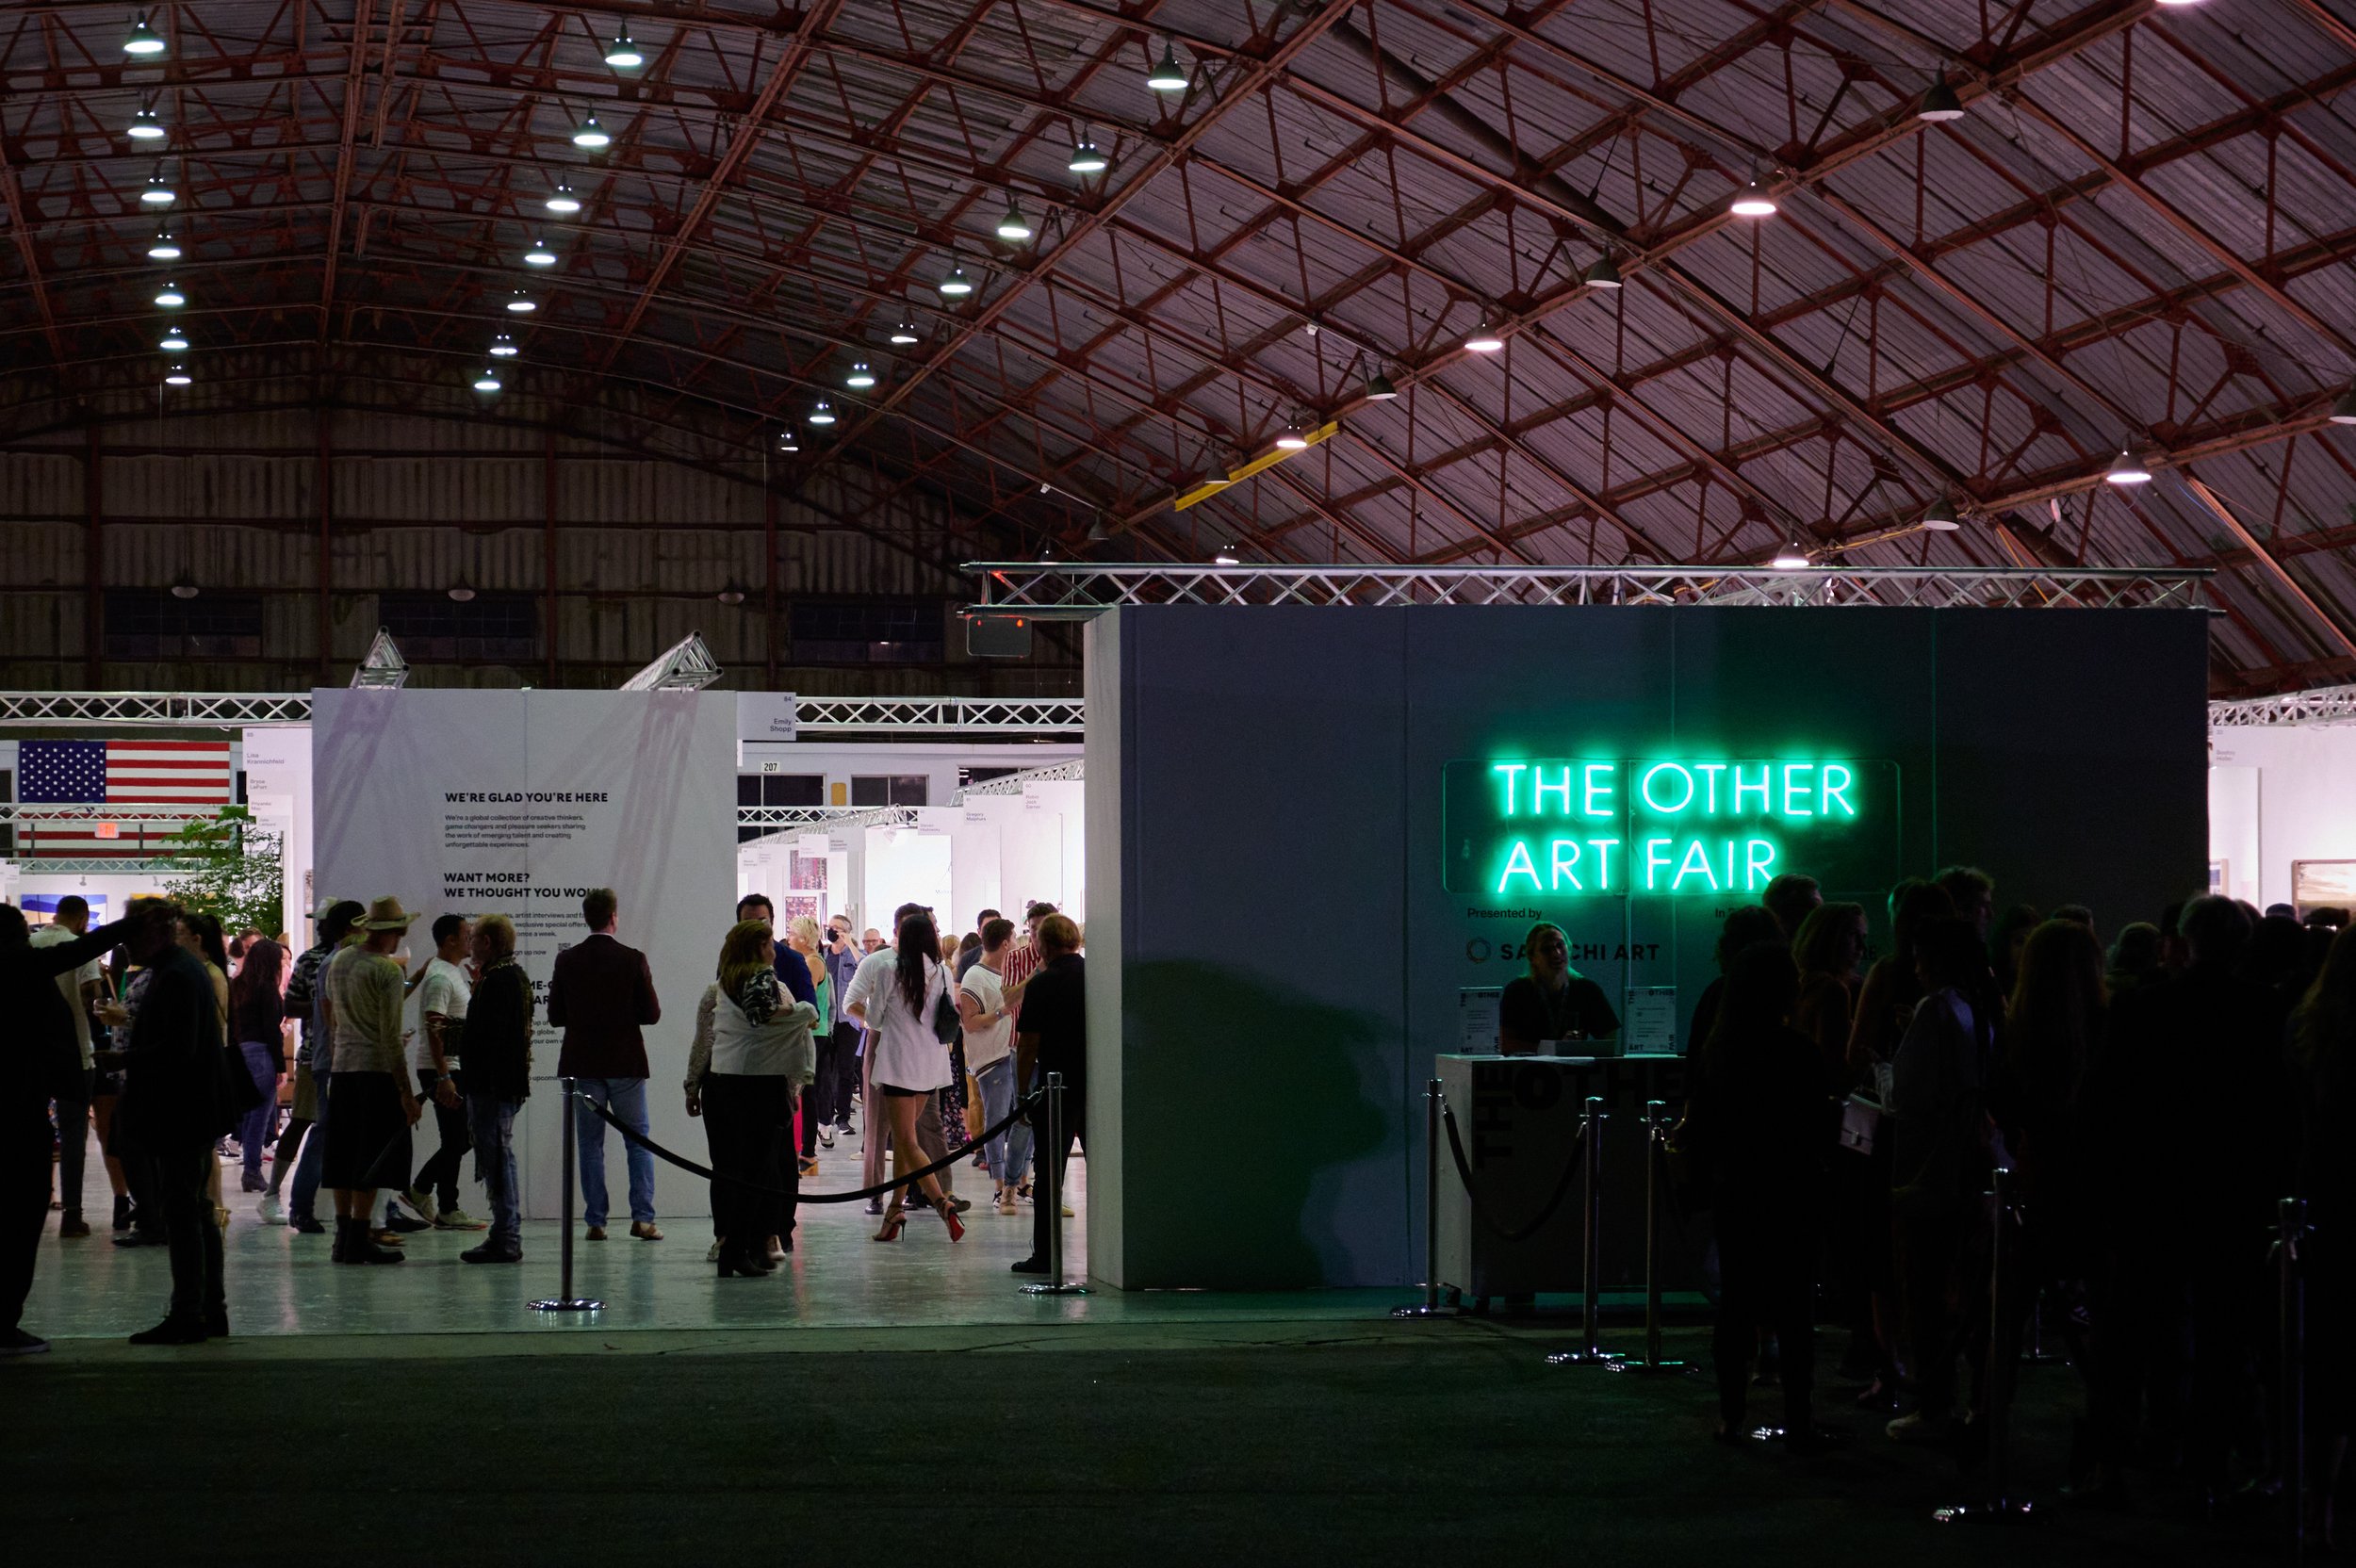  The entrance to The Other Art Fair at night on Thursday, Sept. 22, 2022, at The Barker Hanger in Santa Monica, Calif. (NIcholas McCall | The Corsair) 